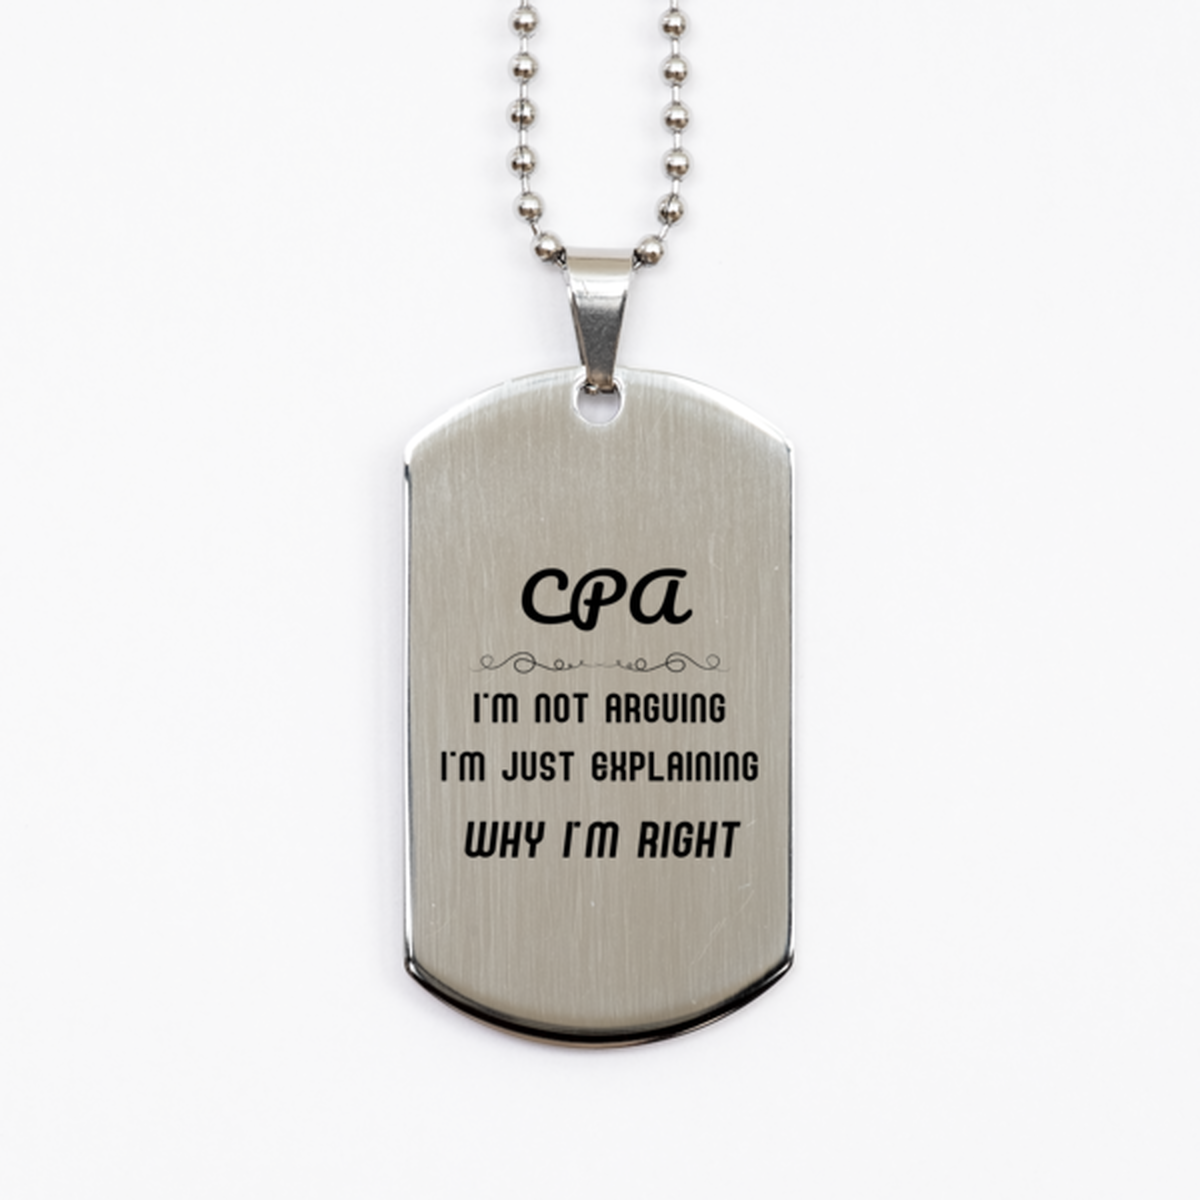 CPA I'm not Arguing. I'm Just Explaining Why I'm RIGHT Silver Dog Tag, Funny Saying Quote CPA Gifts For CPA Graduation Birthday Christmas Gifts for Men Women Coworker